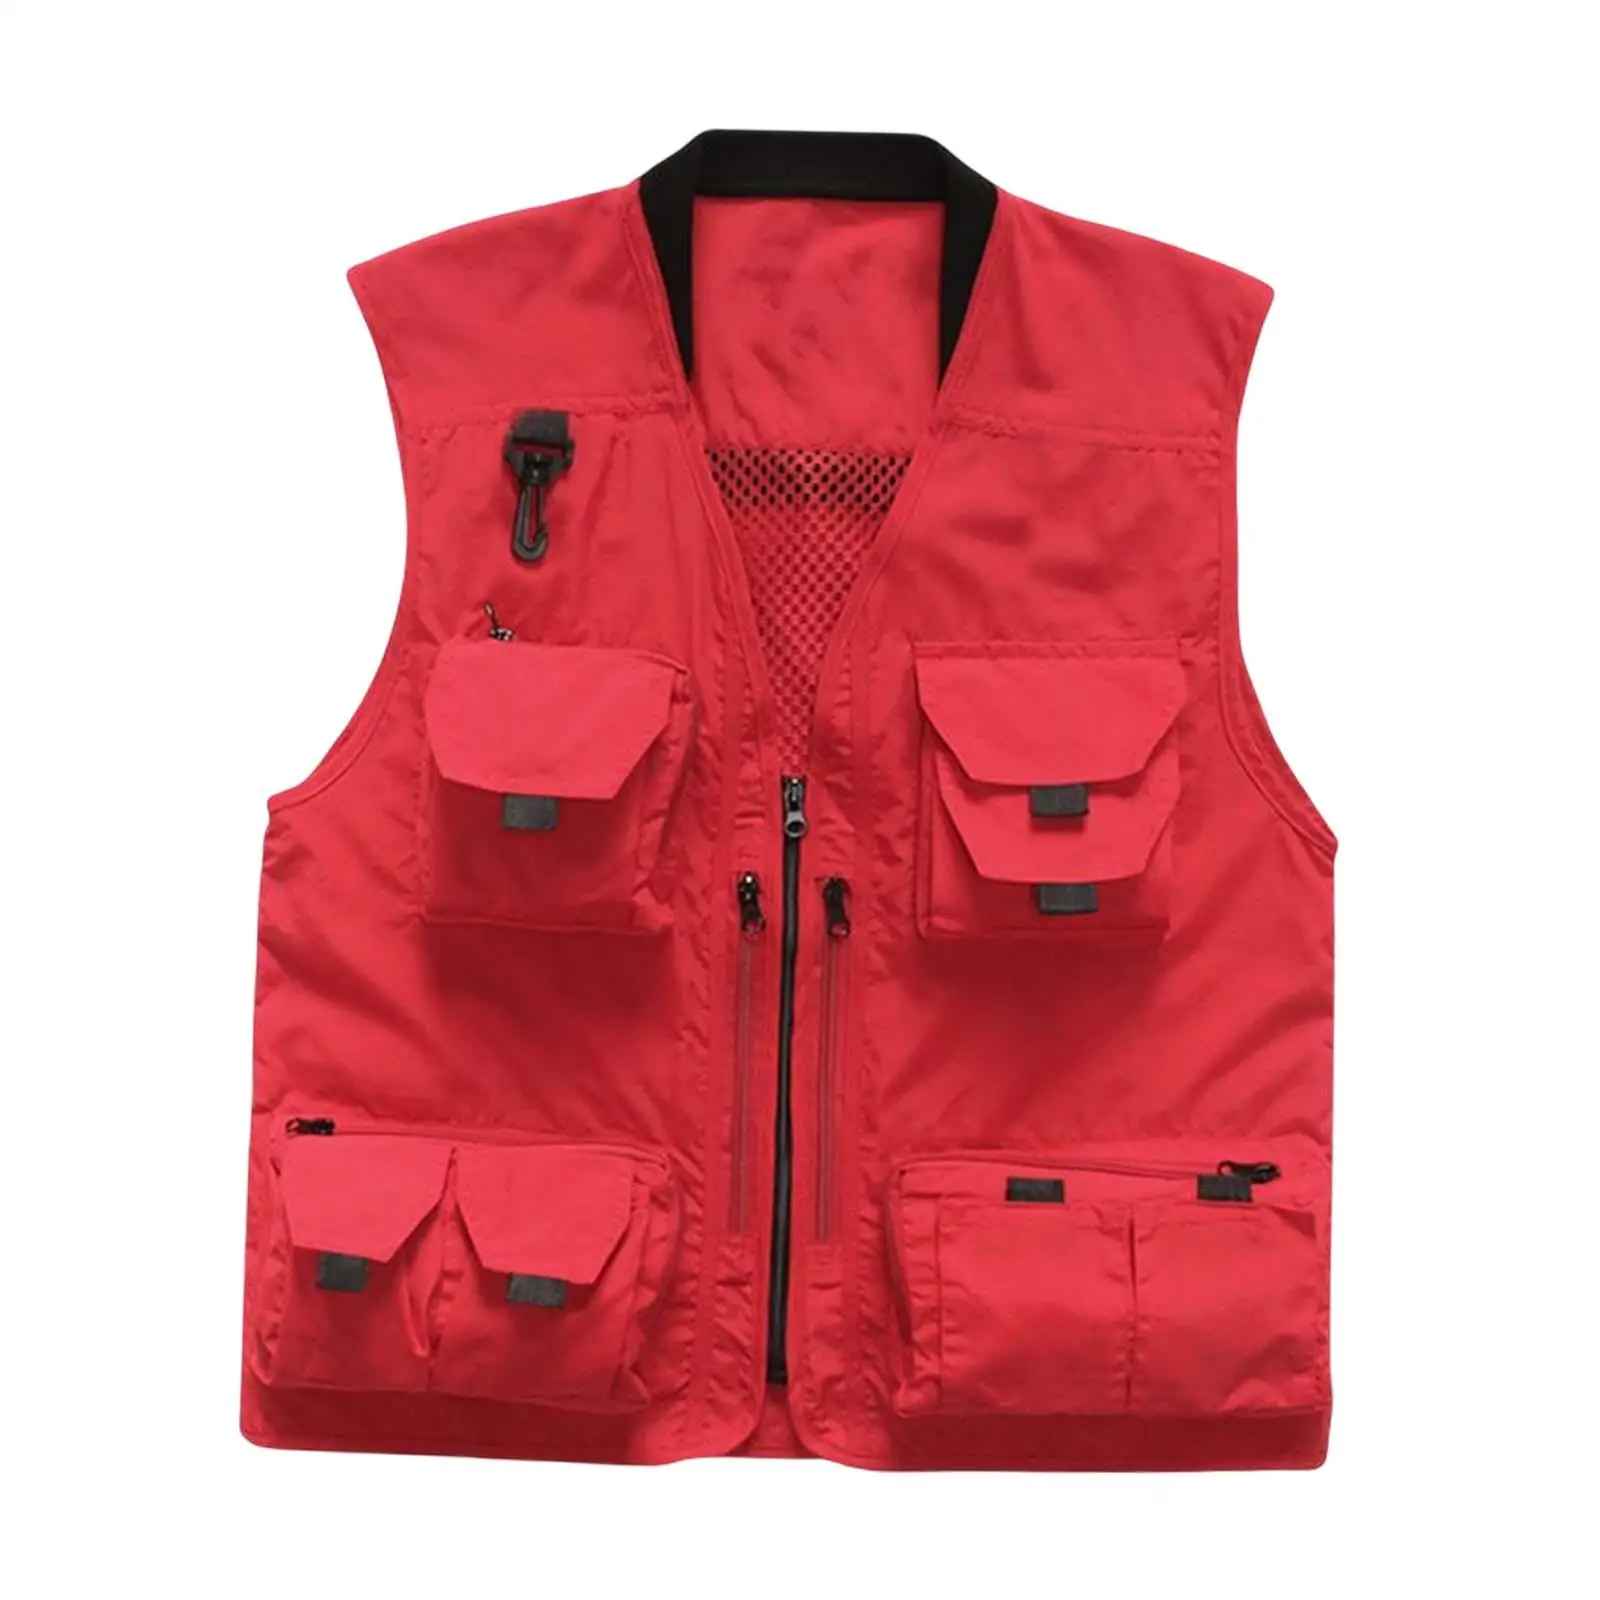 Casual Fishing Vest Photography Costume with Multi Pockets Clothes for Outdoor Climbing